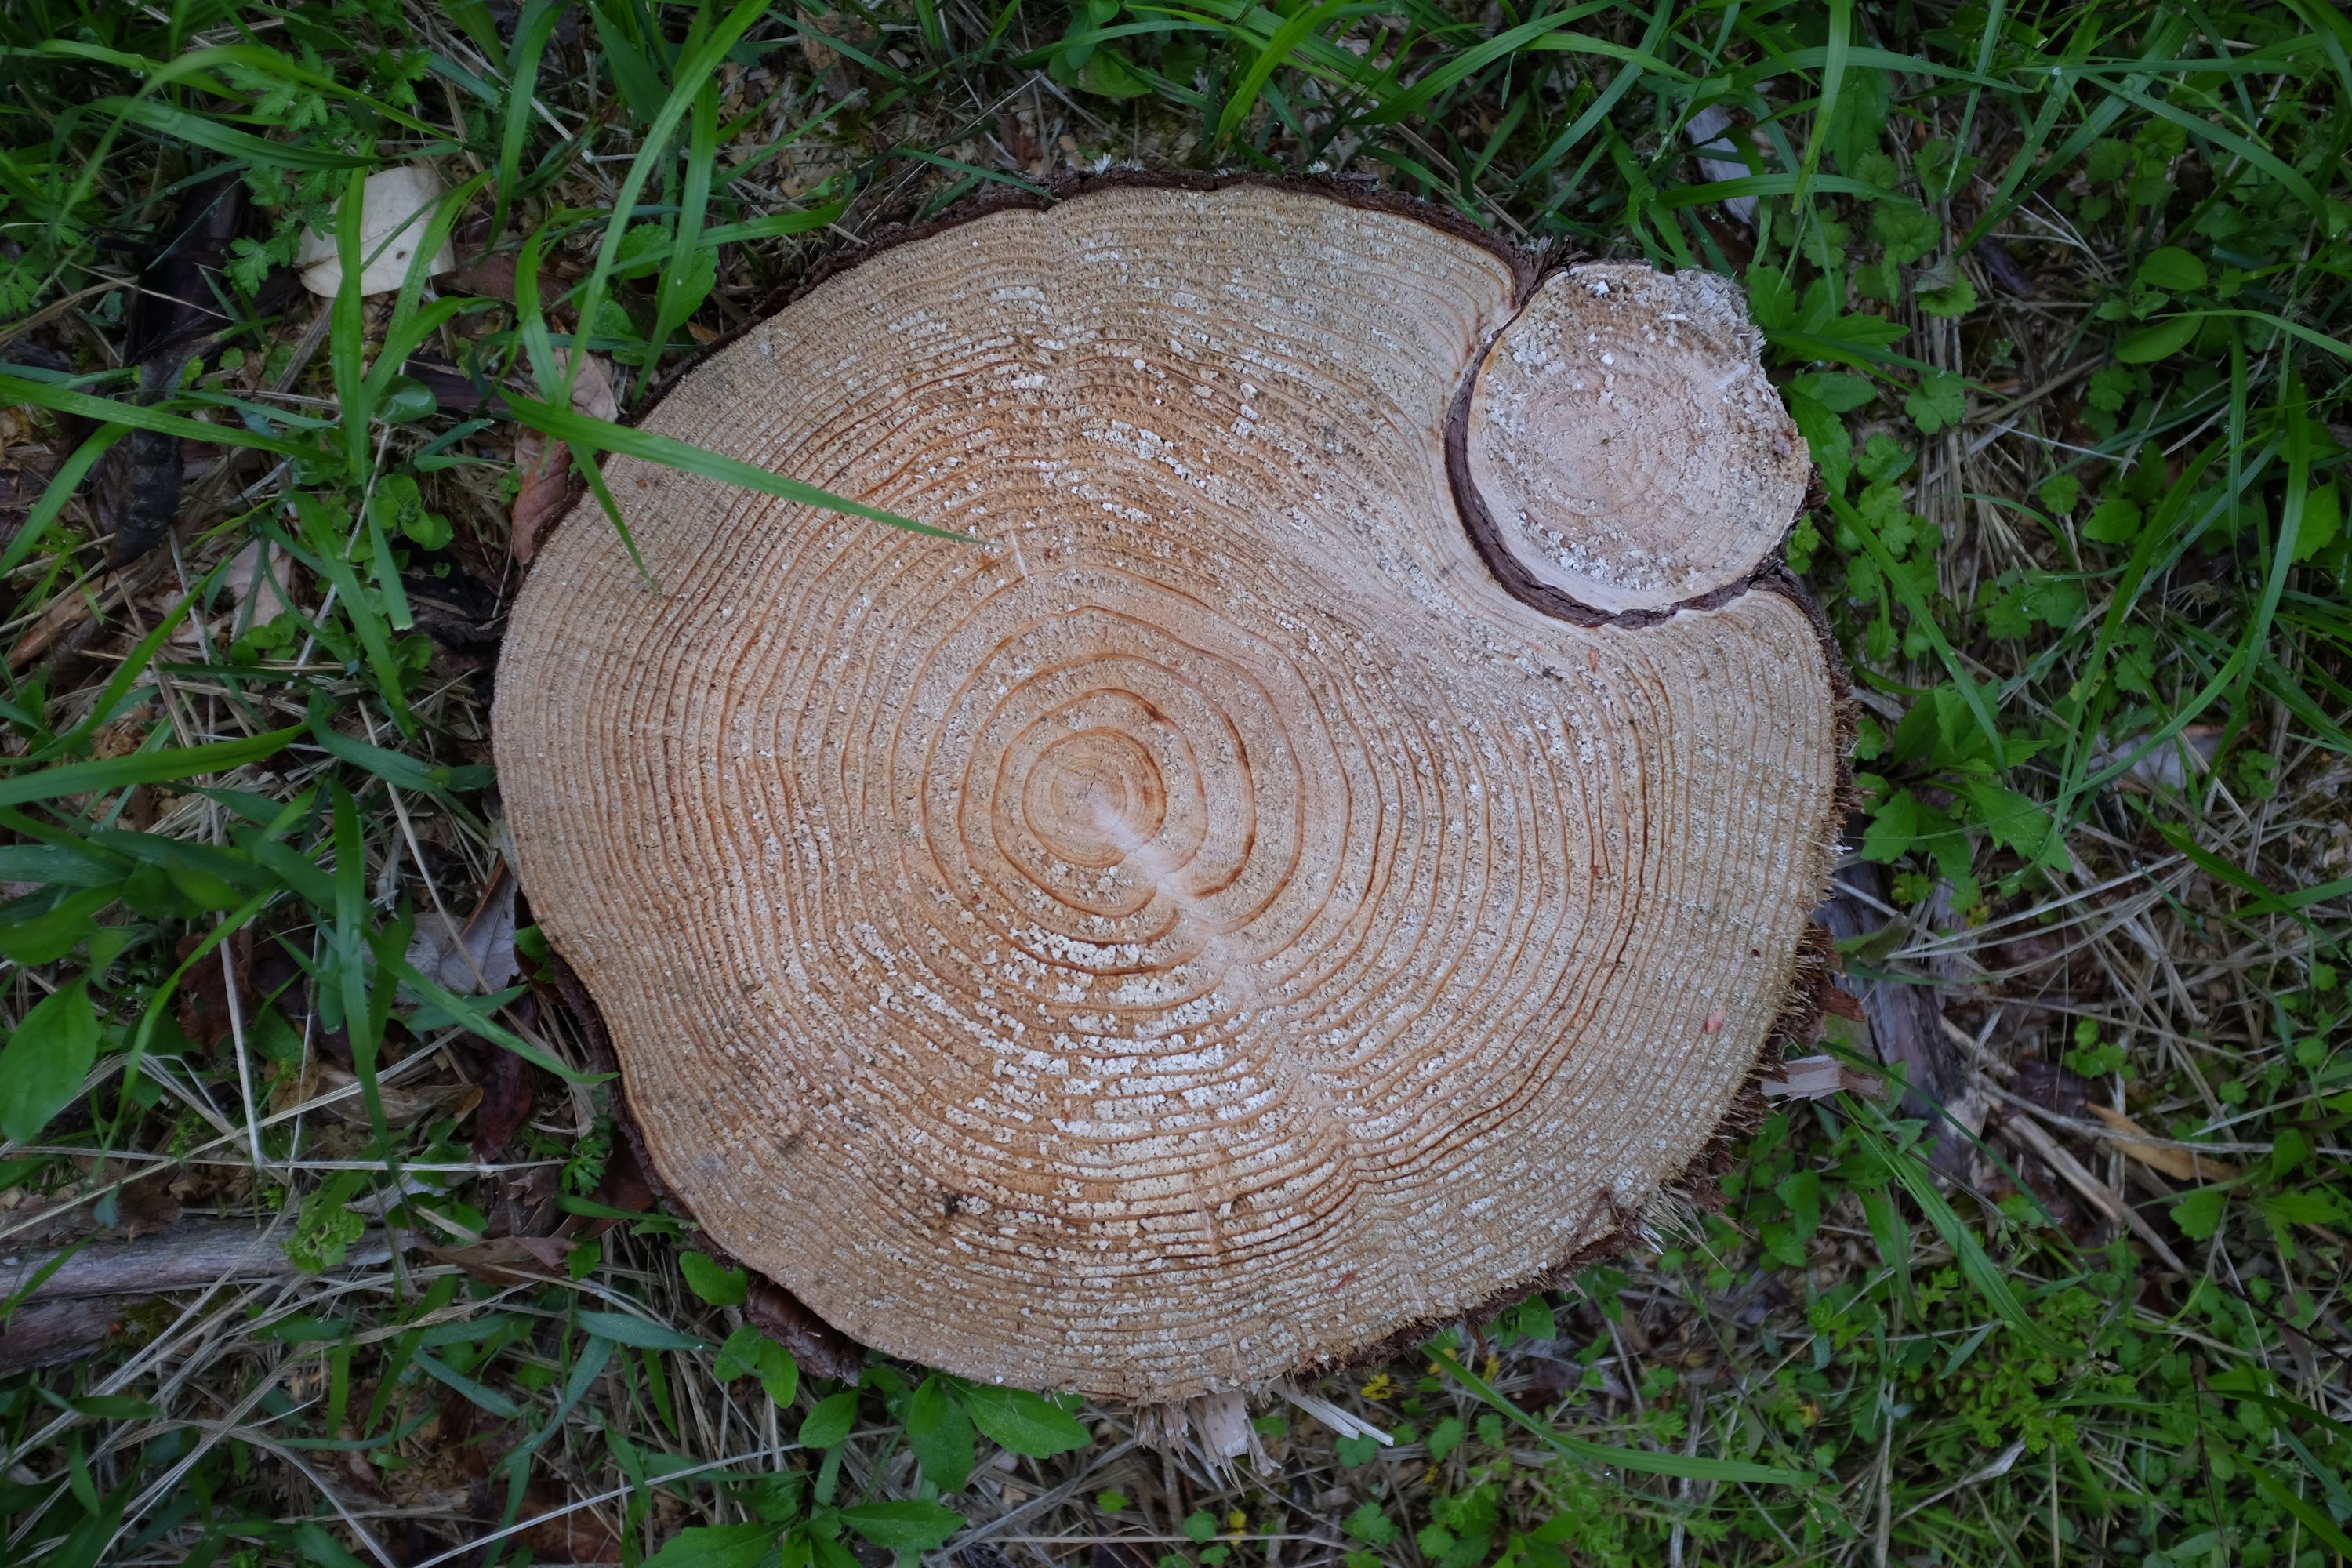 The freshly cut stump of a tree, with a smaller stump half-embedded in it from one side.